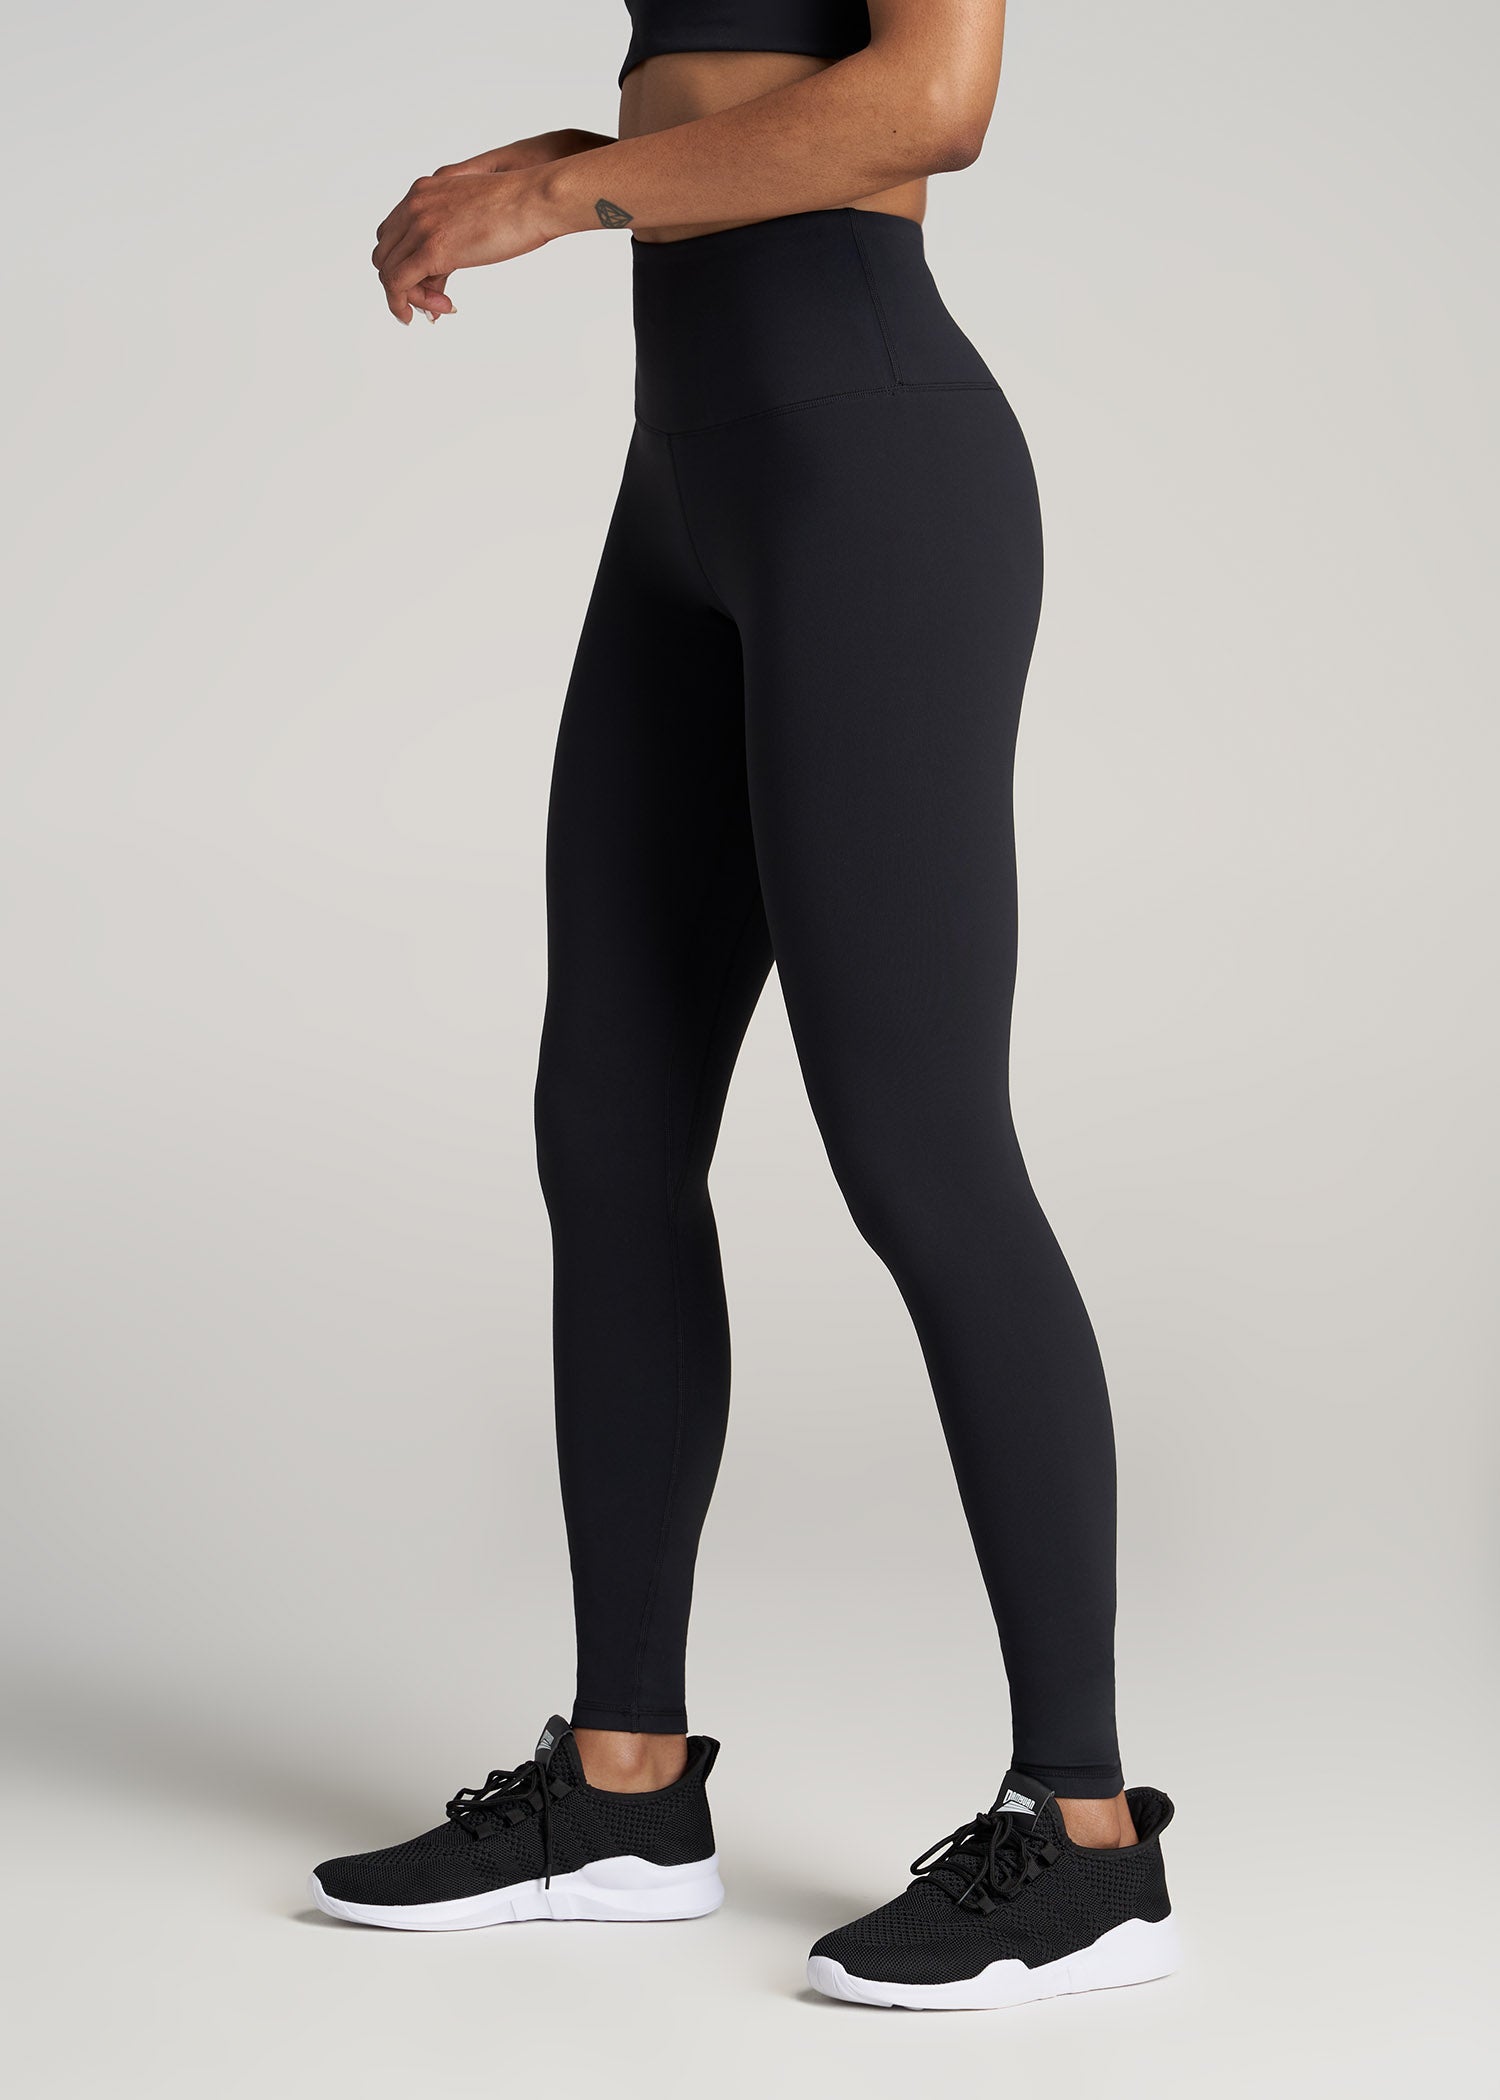 Shop Black Polyester Slim Fit Women's Sports Tights